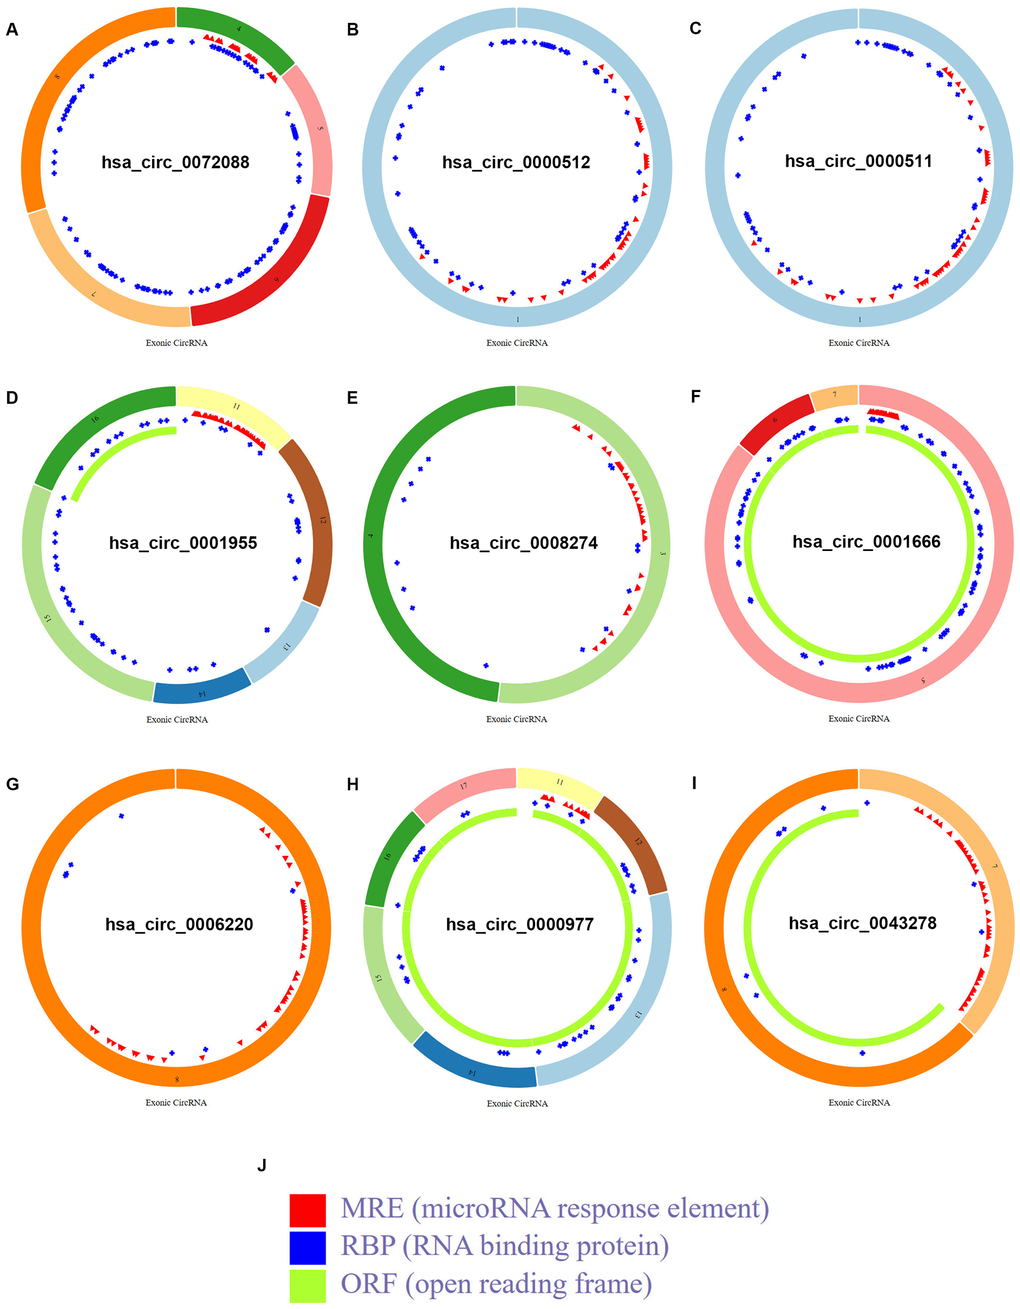 Structural patterns of the 9 circRNAs in CSCD database. (A) The structural pattern of hsa